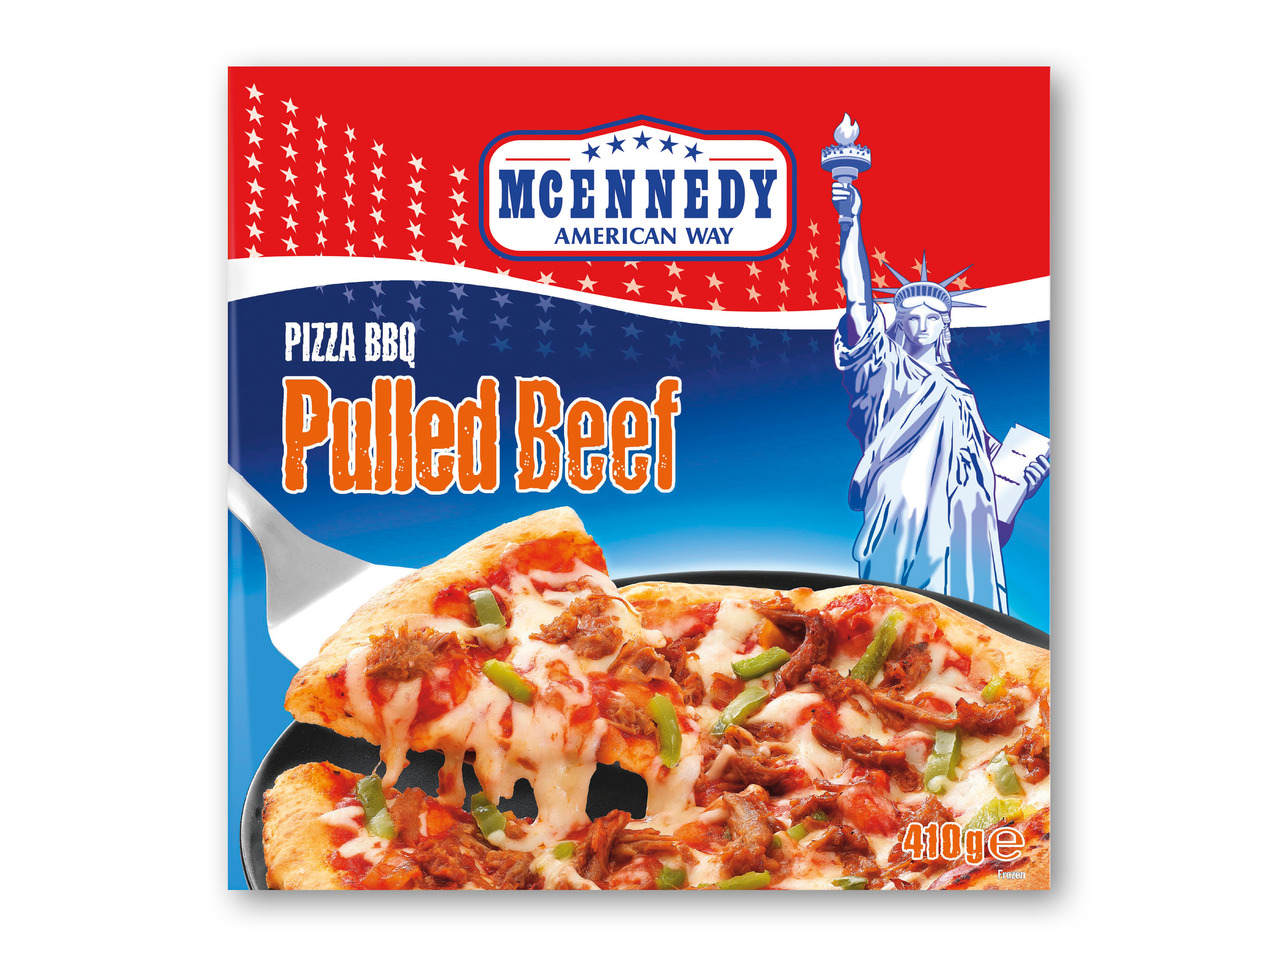 MCENNEDY Pulled beef pizza